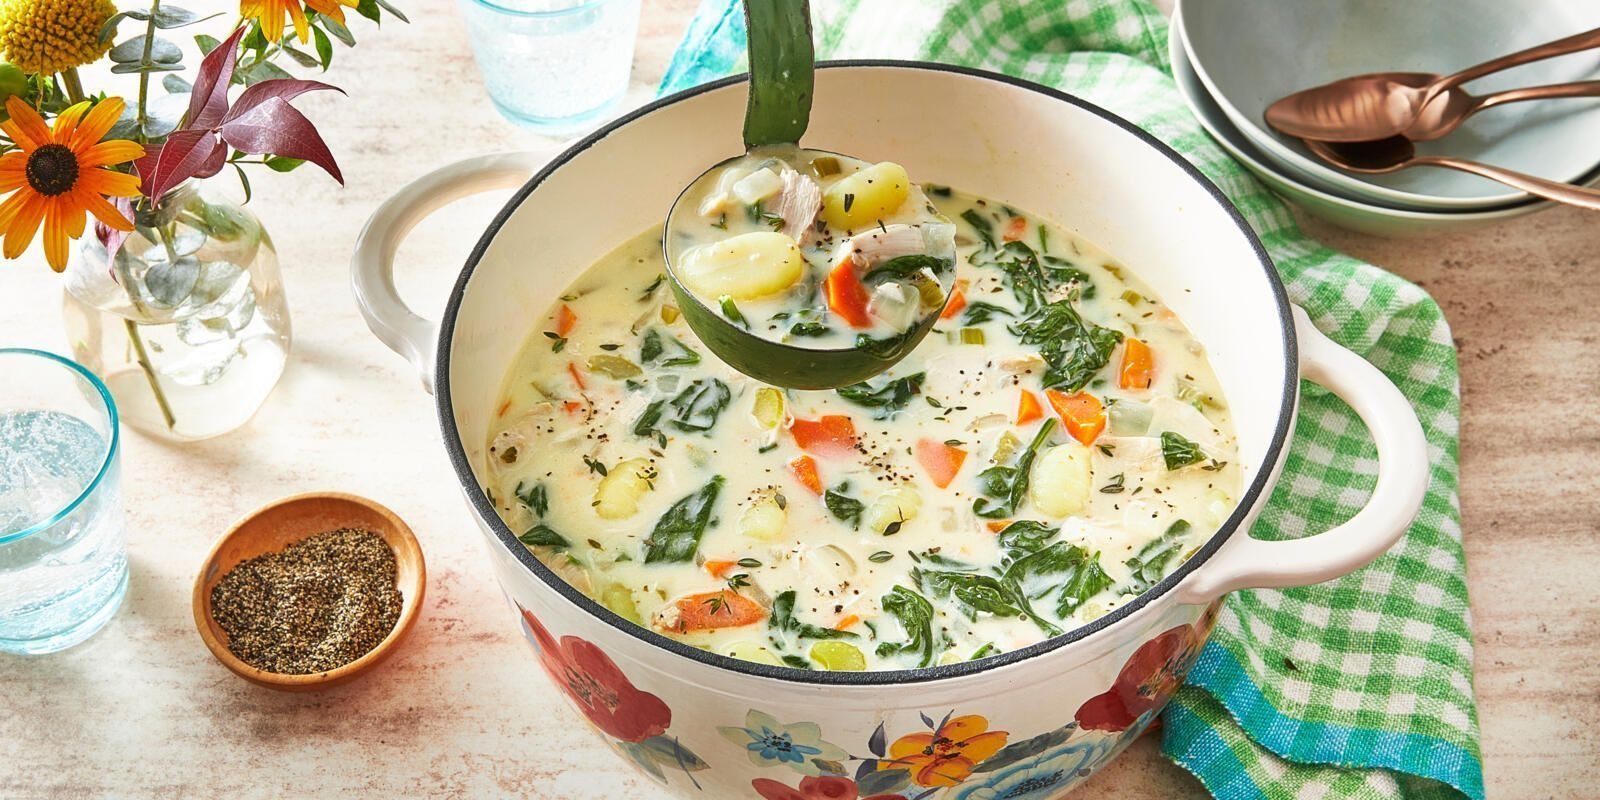 Best soup makers for easy lunches and dinners - Which?